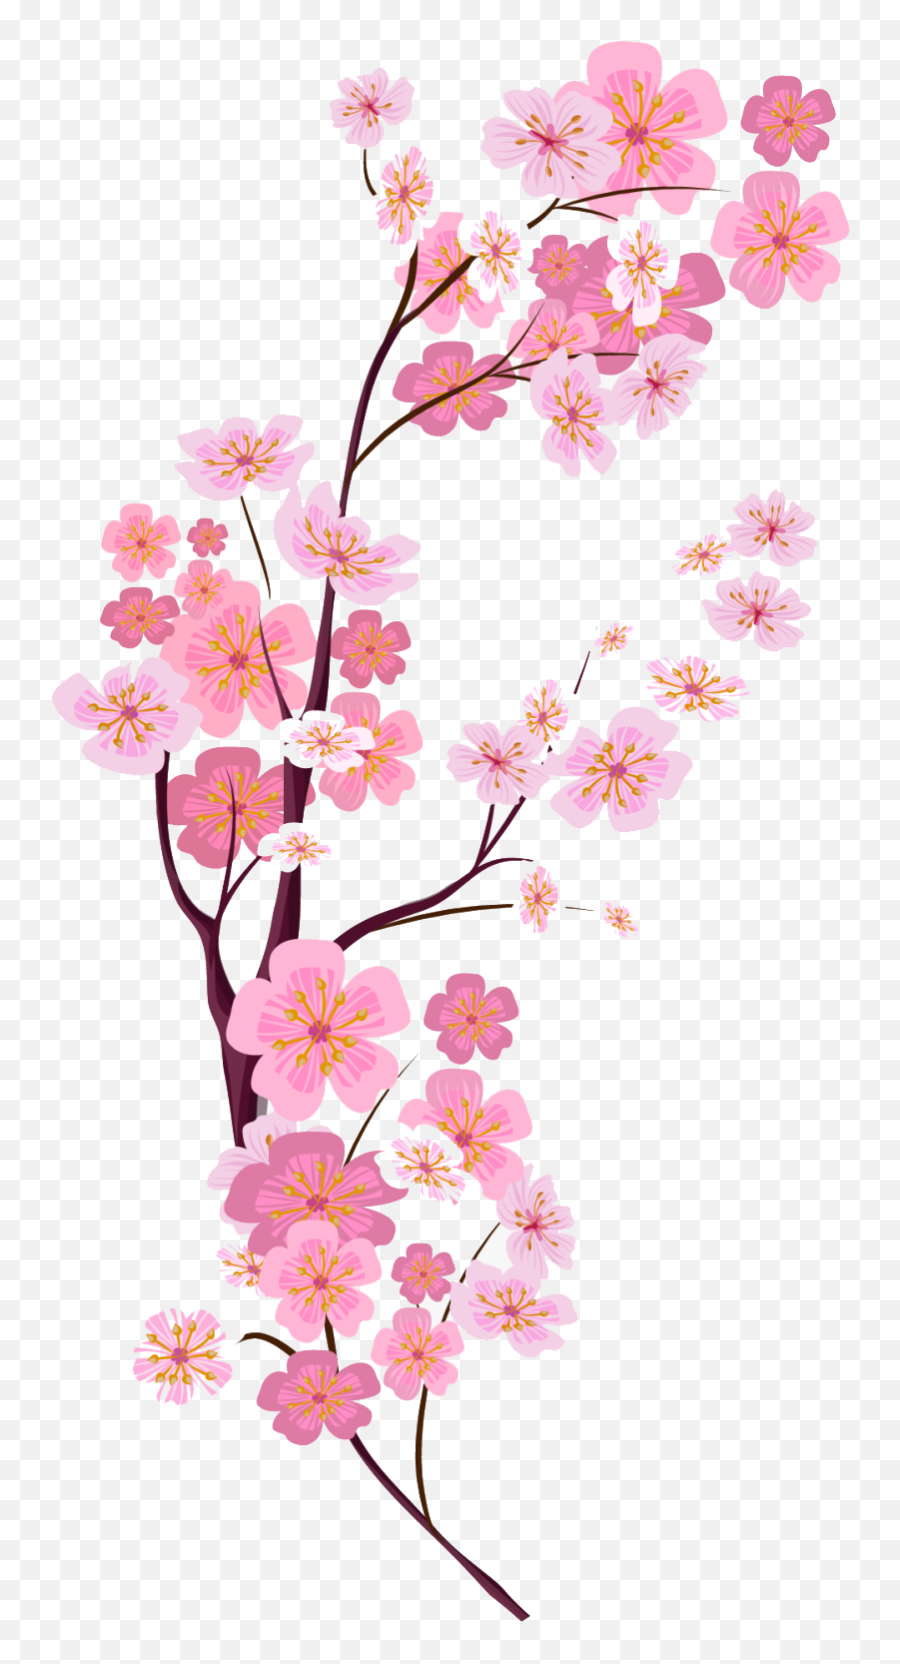 Collection Of Peach Blossom Png Images - Cherry Blossom Png,Tong Hop Icon Dep